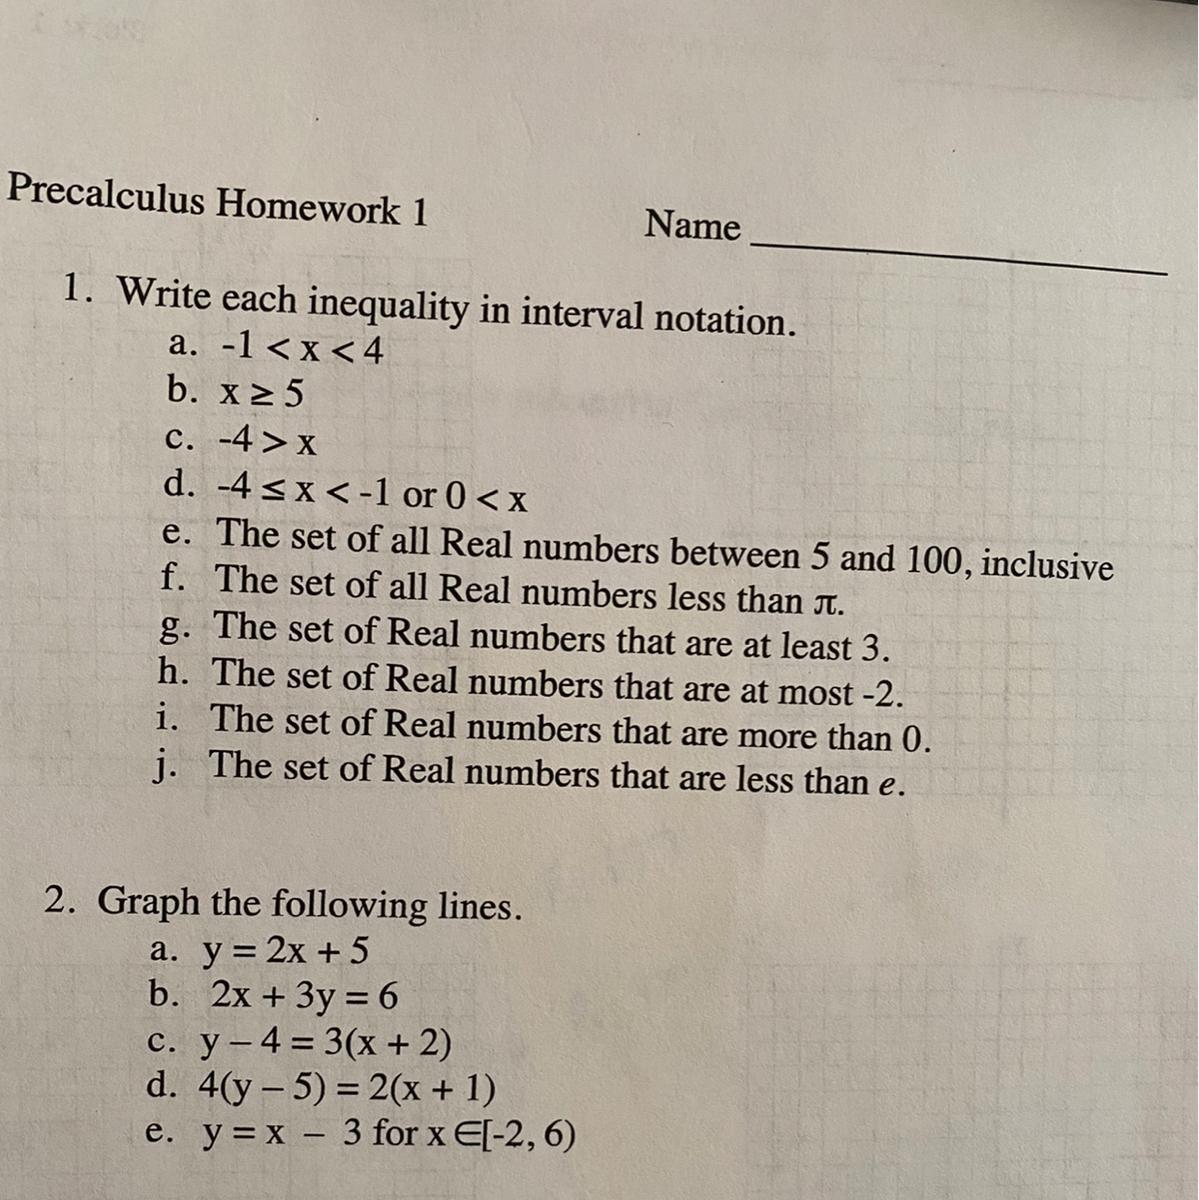 Hi, I Need Help With Question 1 Of My Precalculus Homework.